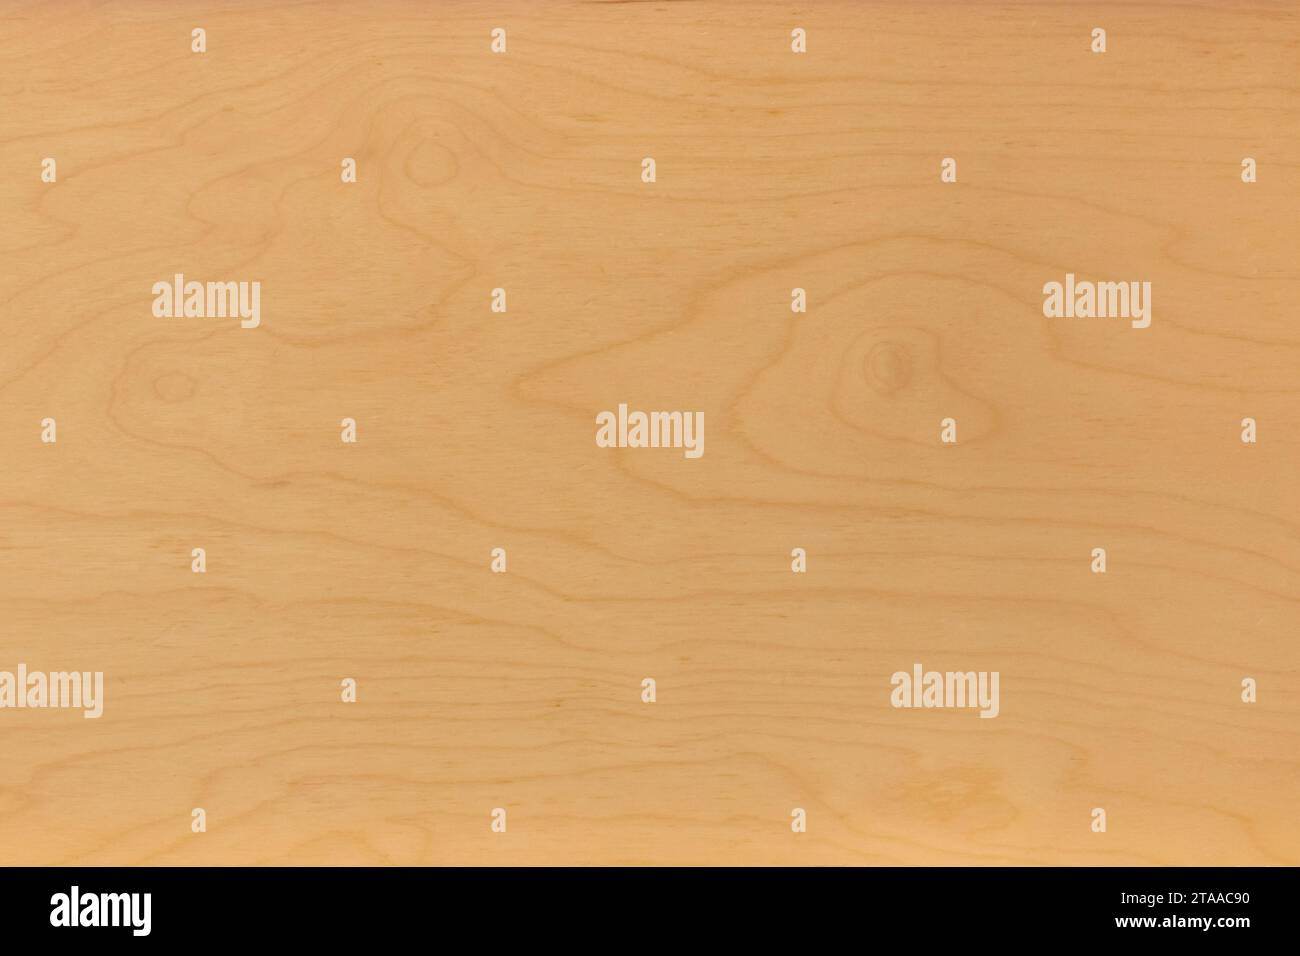 Light Yellow Smooth Surface With Abstract Natural Wood Pattern Texture Boards Background. Stock Photo